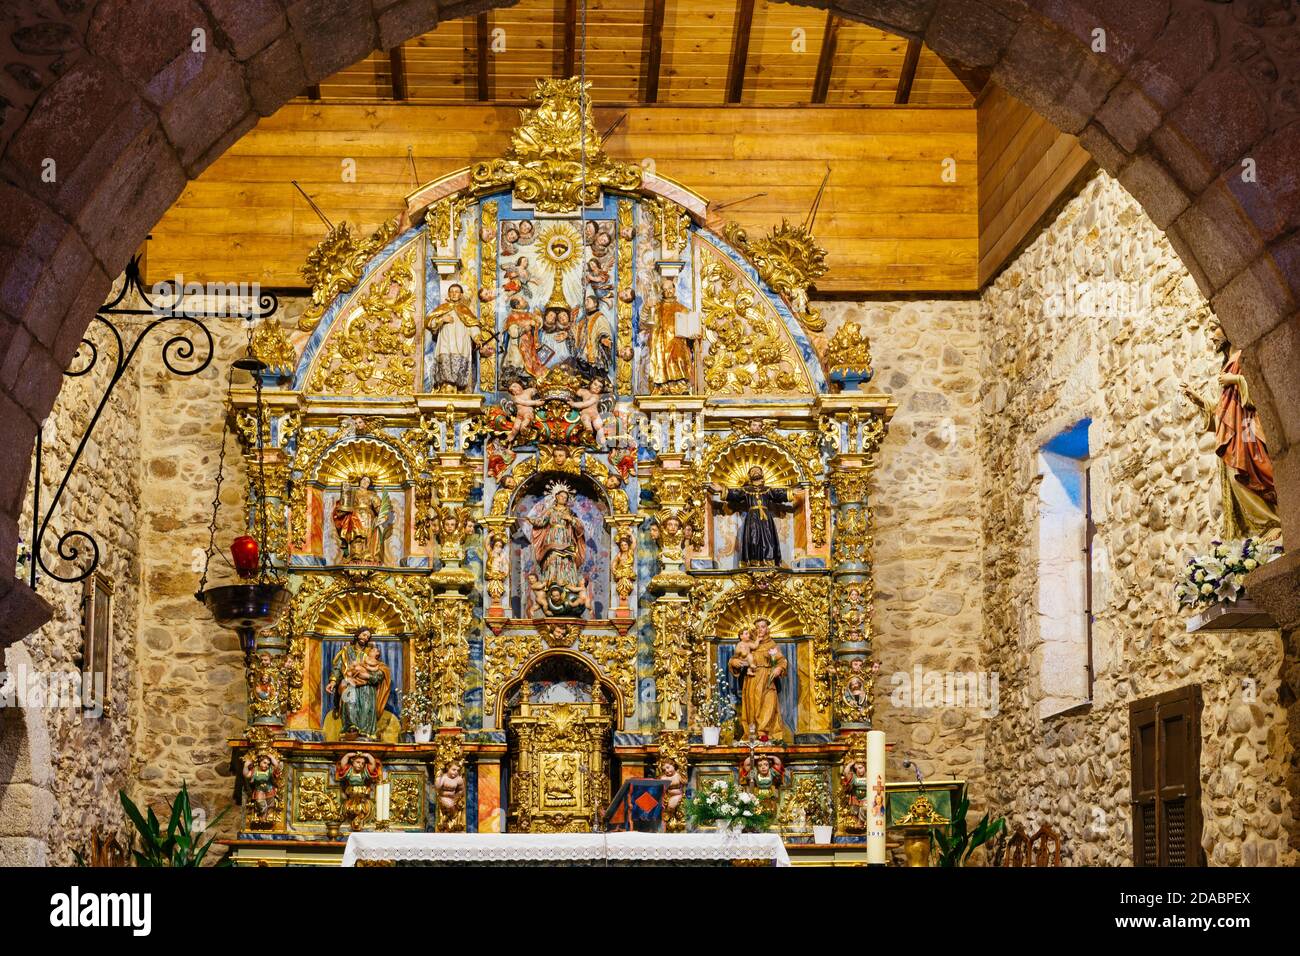 Altarpiece. Church of Our Lady of the Assumption, 18th century parish temple. Fuentes Nuevas is a town belonging to the municipality of Ponferrada. Fr Stock Photo